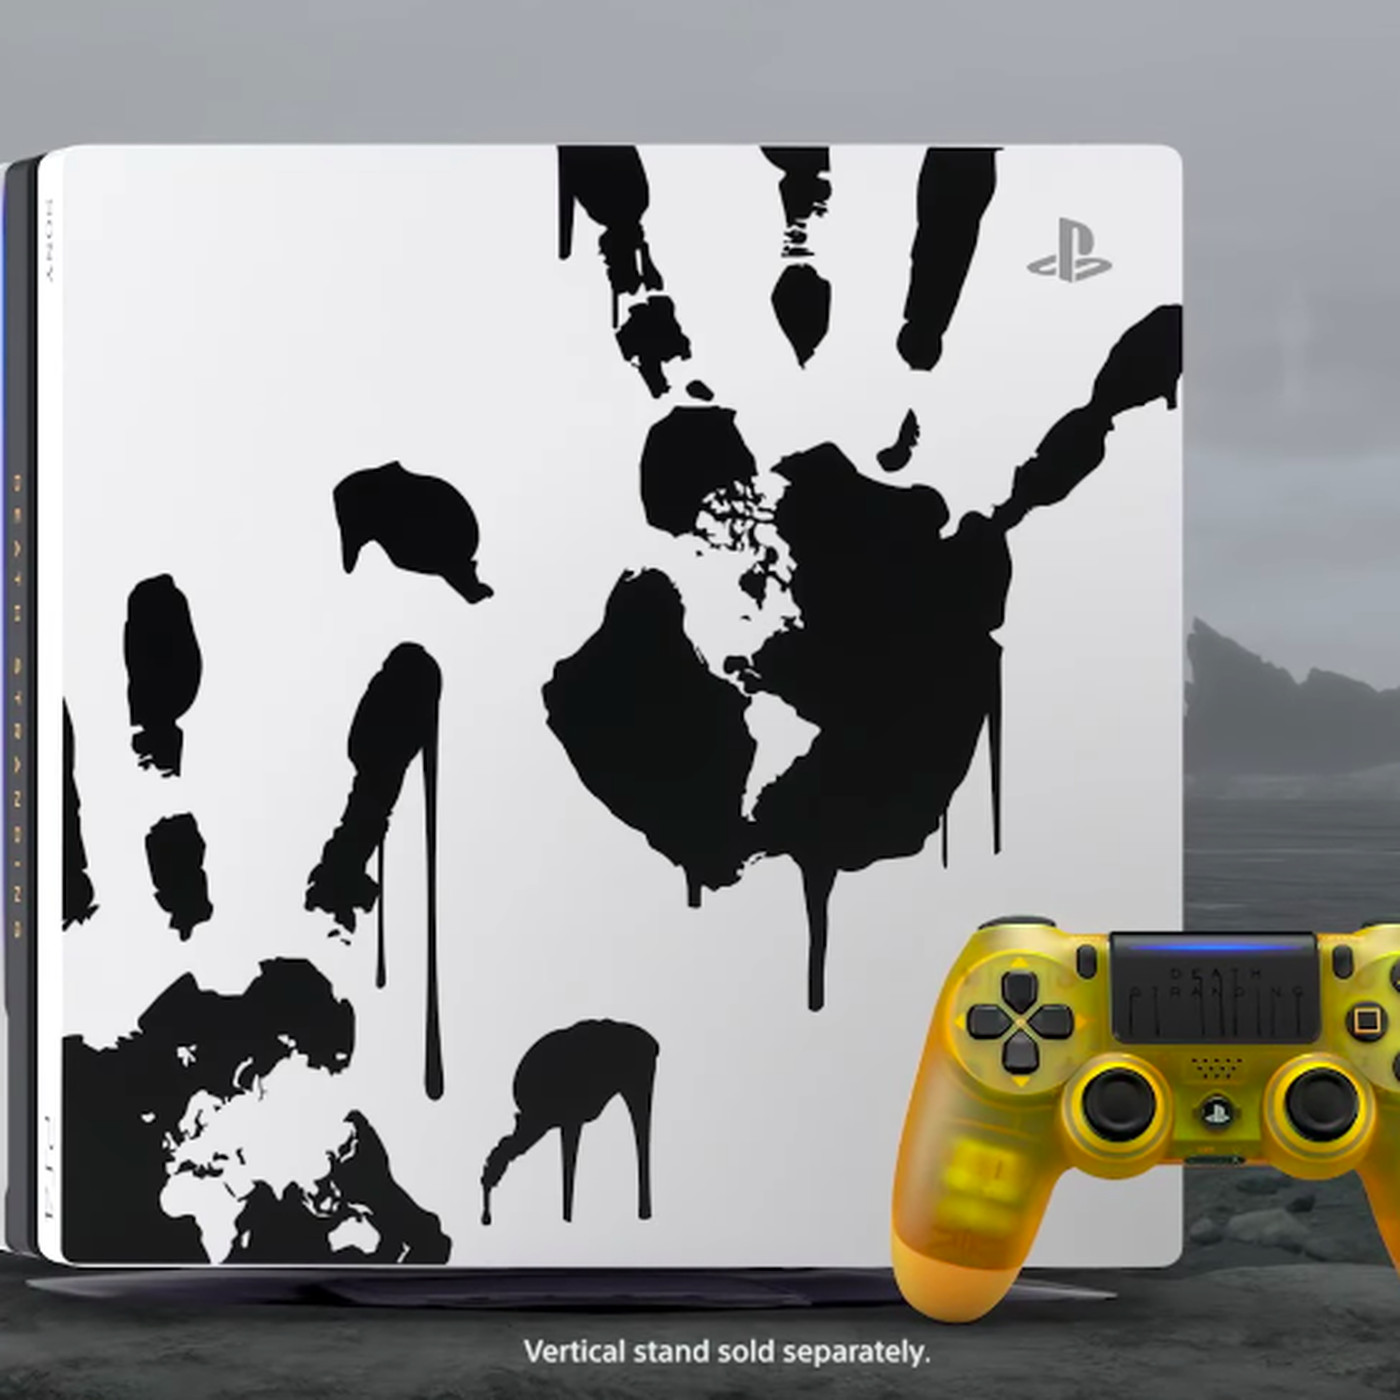 Sony's Death Stranding PS4 has a translucent BB pod controller - The Verge